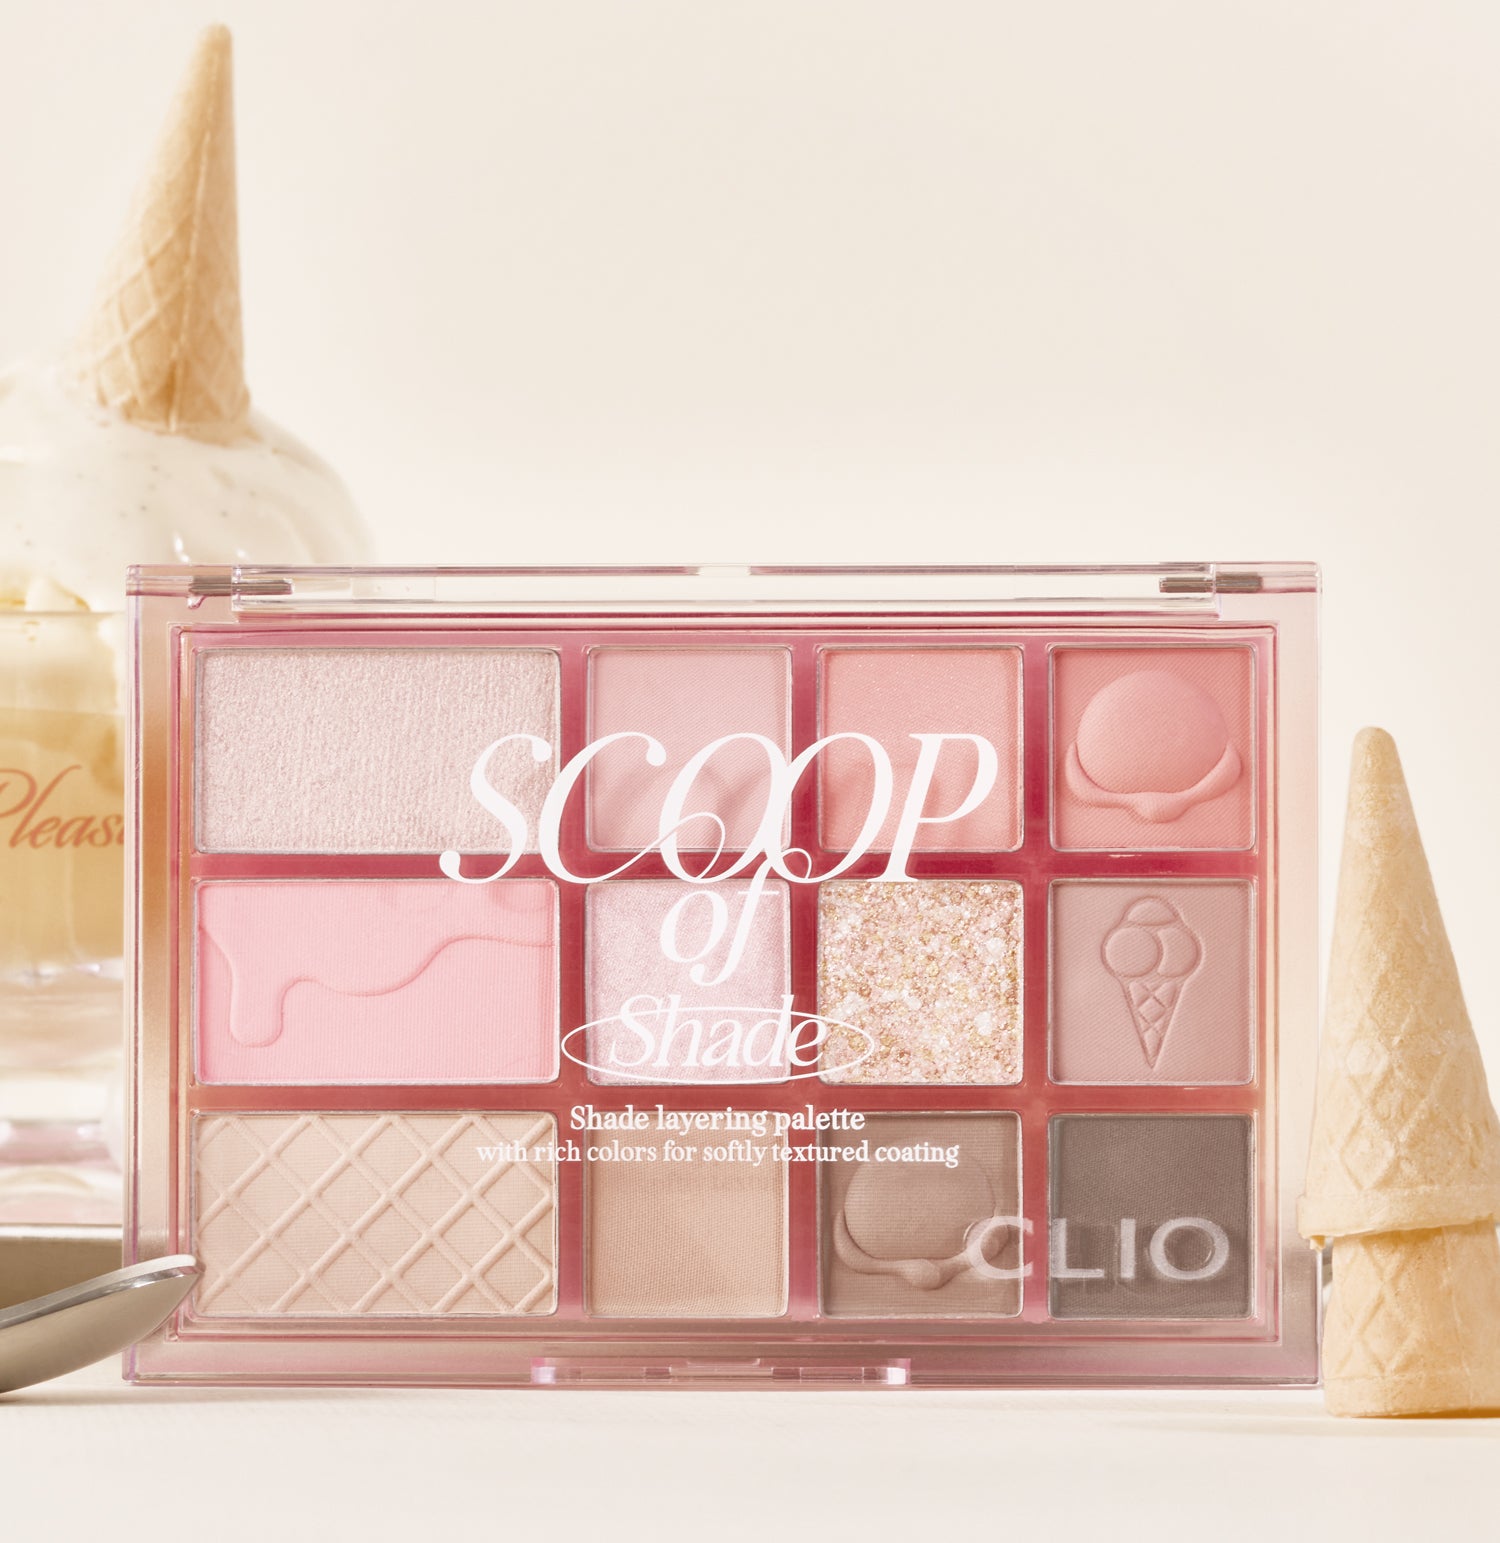 [CLIO] SHADE & SHADOW PALETTE 03 SCOOP OF SHADE